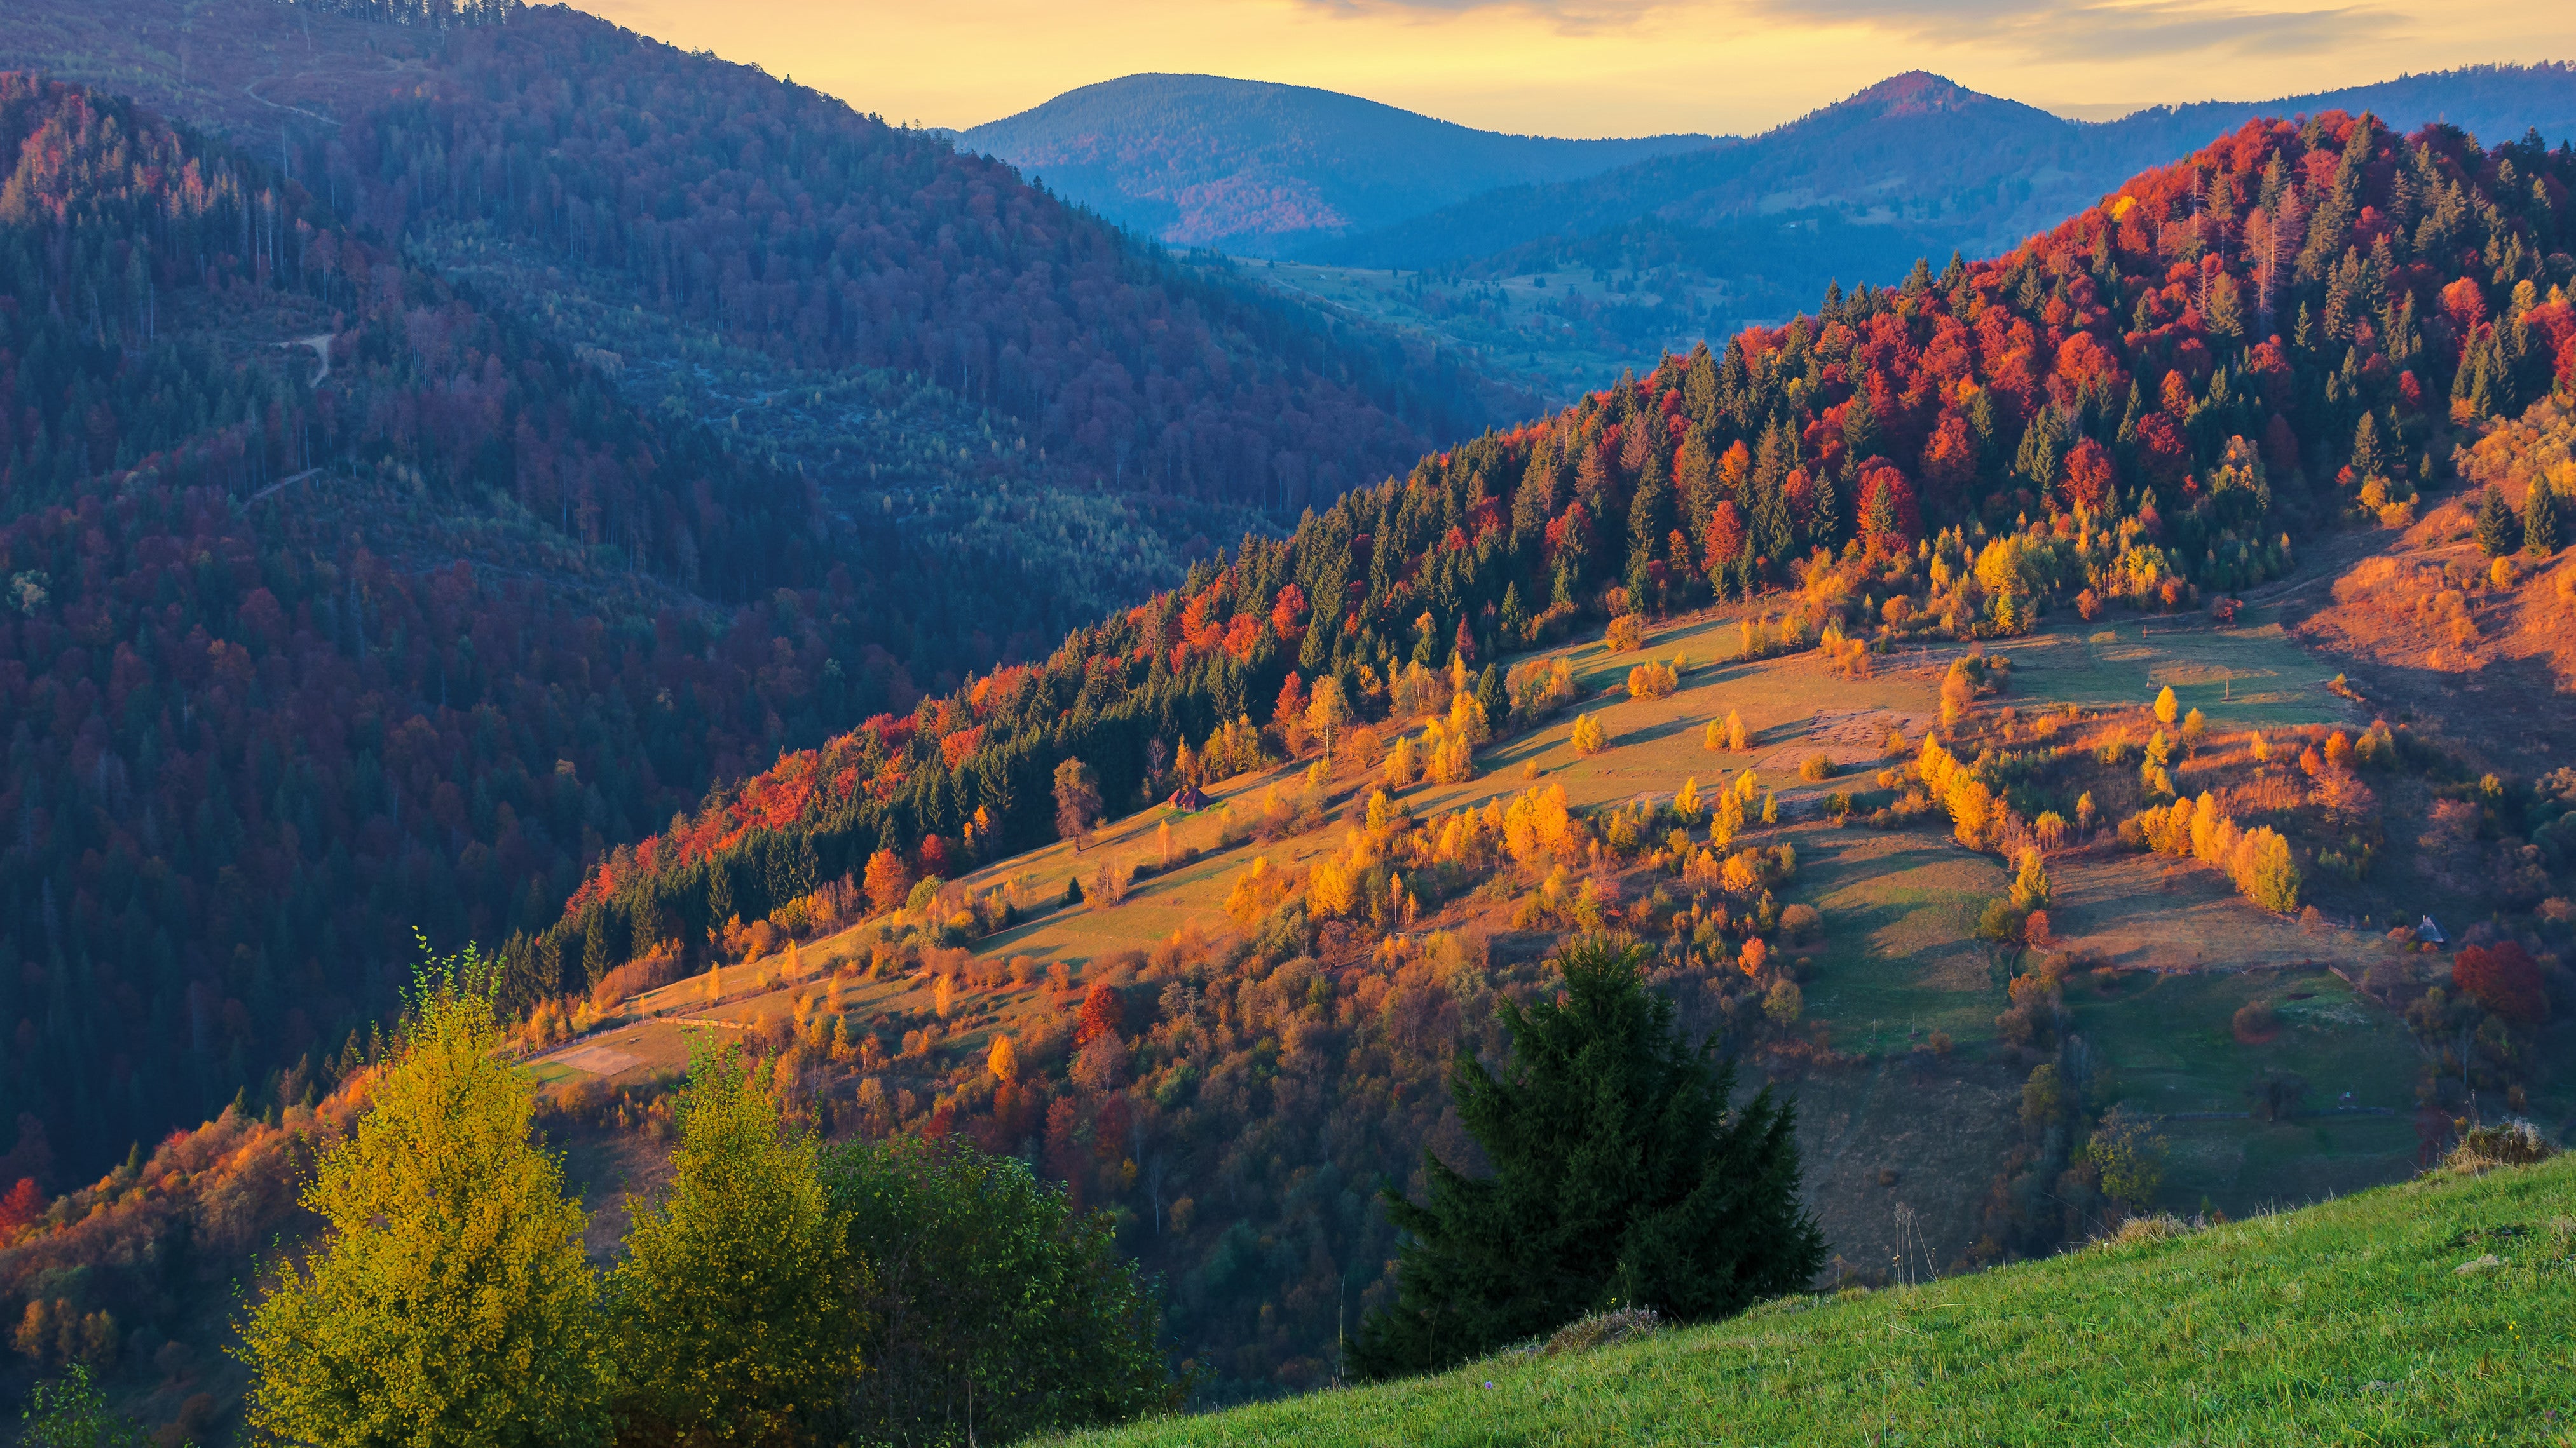 How To Find The Best Autumn Foliage For Your American Trip